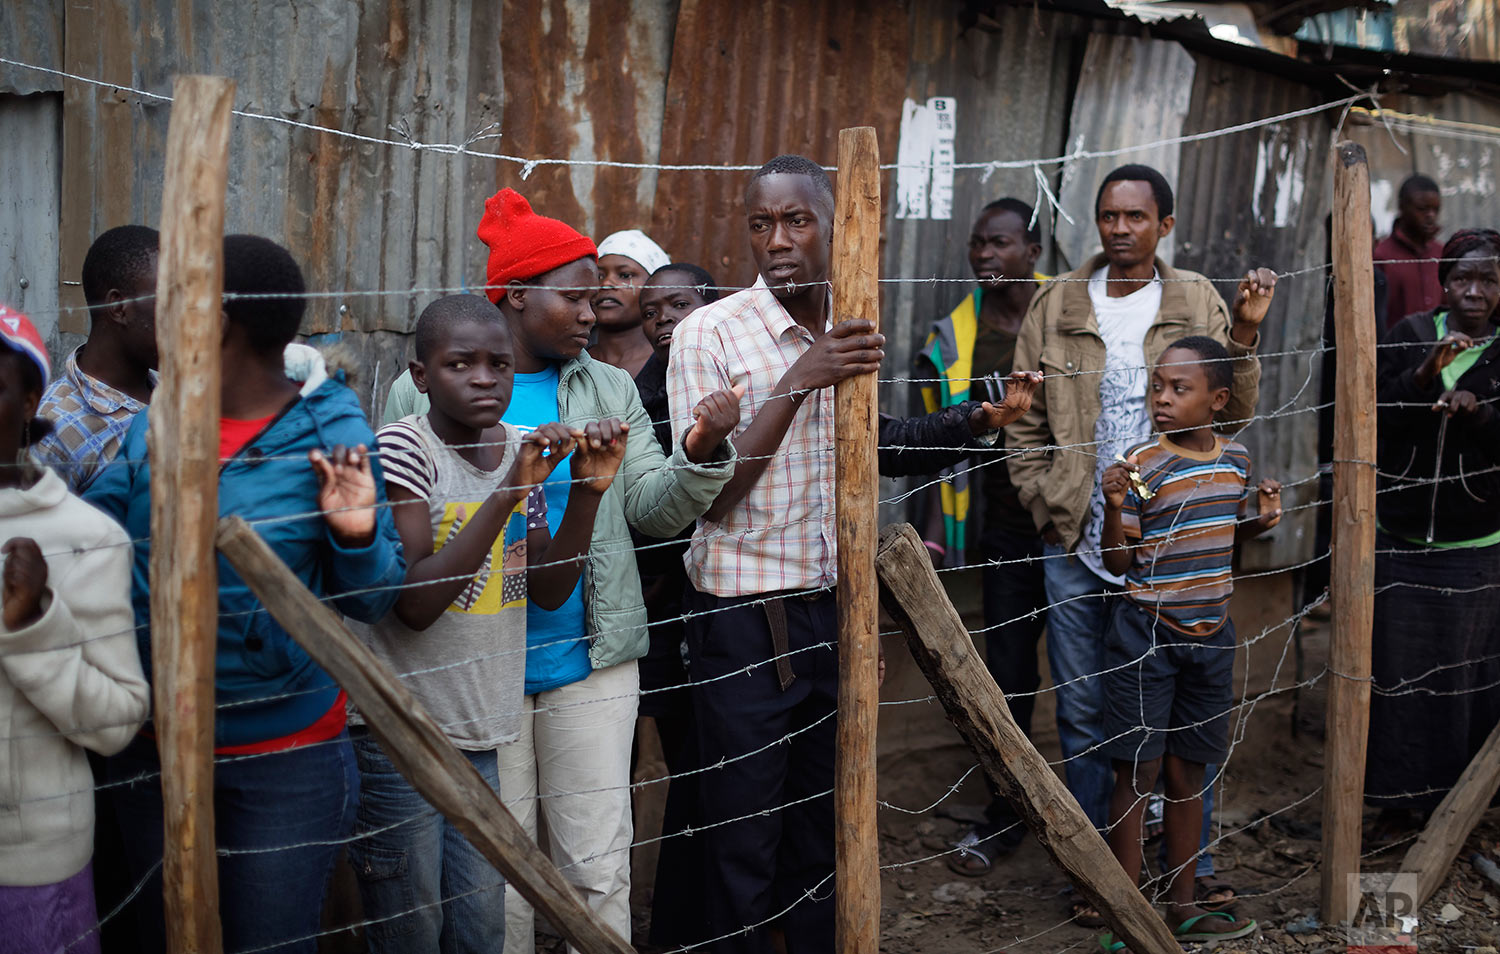  Residents look through a fence at the scene near the body of a man who had been shot in the head and who the crowd claimed had been shot by police, in the Mathare area of Nairobi, Kenya, Wednesday, Aug. 9, 2017. Kenya's election took an ominous turn on Wednesday as violent protests erupted in the capital. (AP Photo/Ben Curtis) 